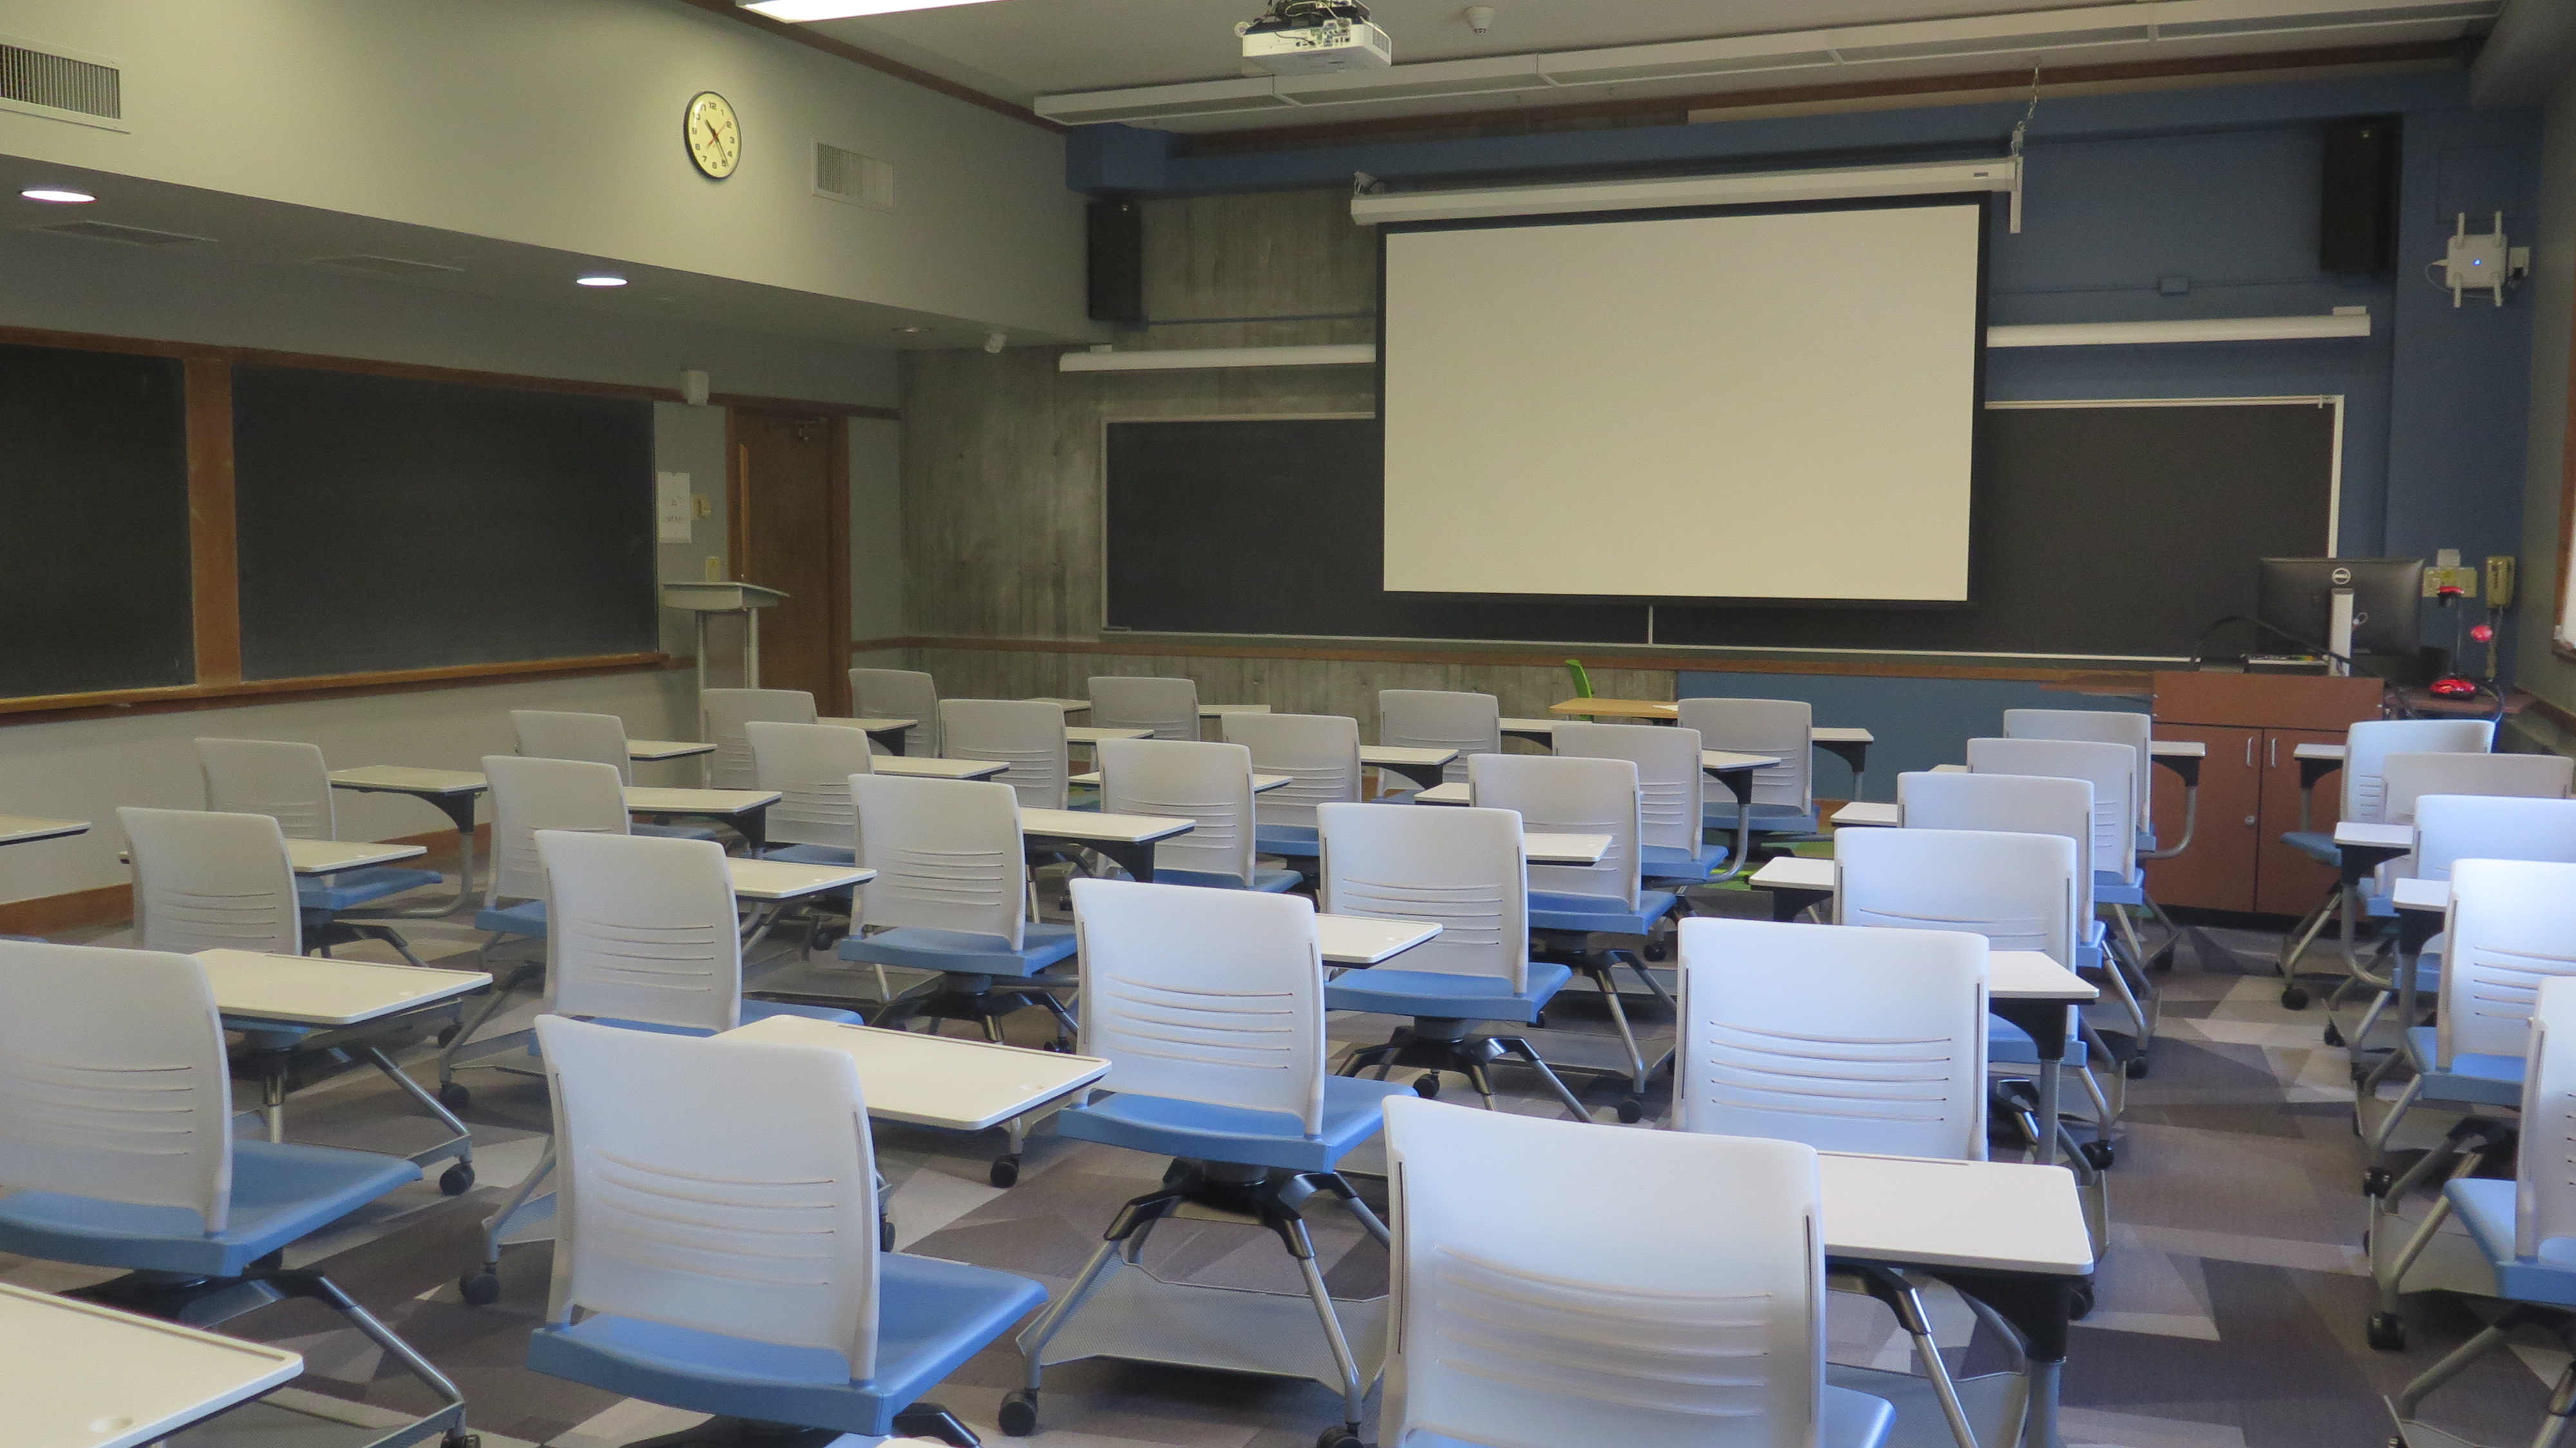 View of Bond Hall 225 from the back of the room, Podium at the front of room. carpet floor, movable tablet arm chairs, chalkboard at the front of class, whiteboard spread out on the side walls of classroom